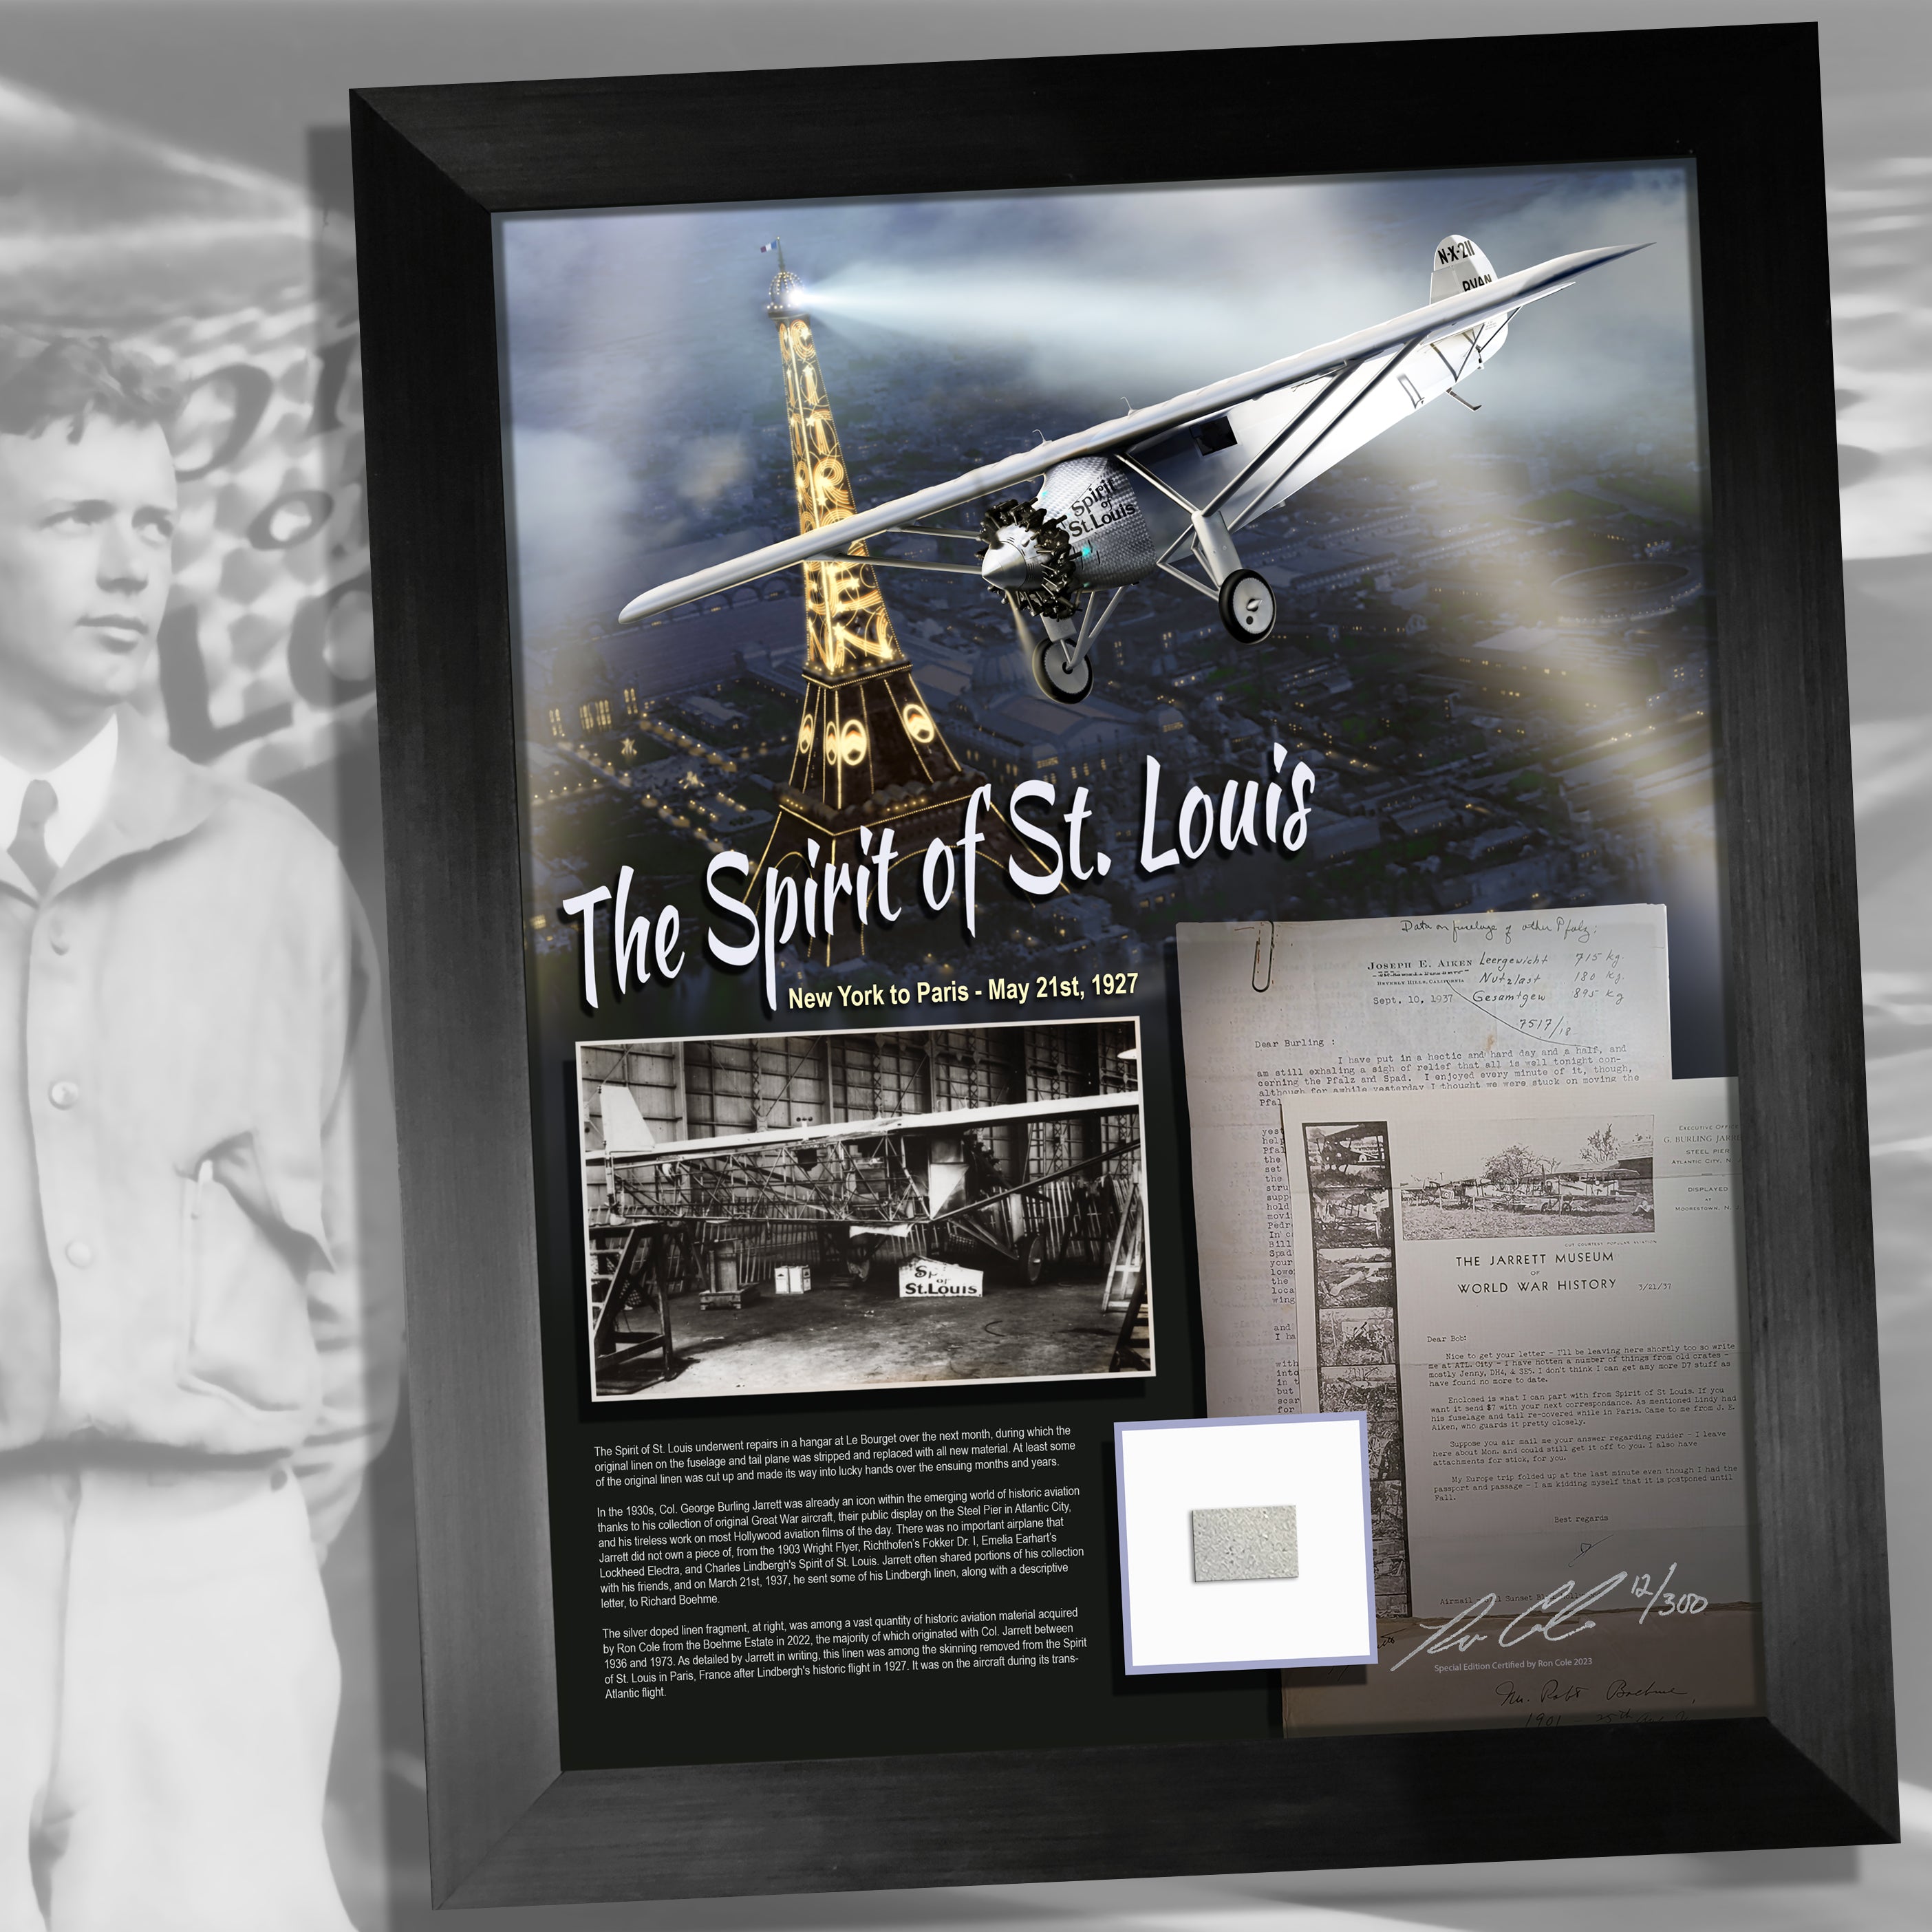 NYP-3 Spirit of St. Louis (flying replica), Image of our NY…